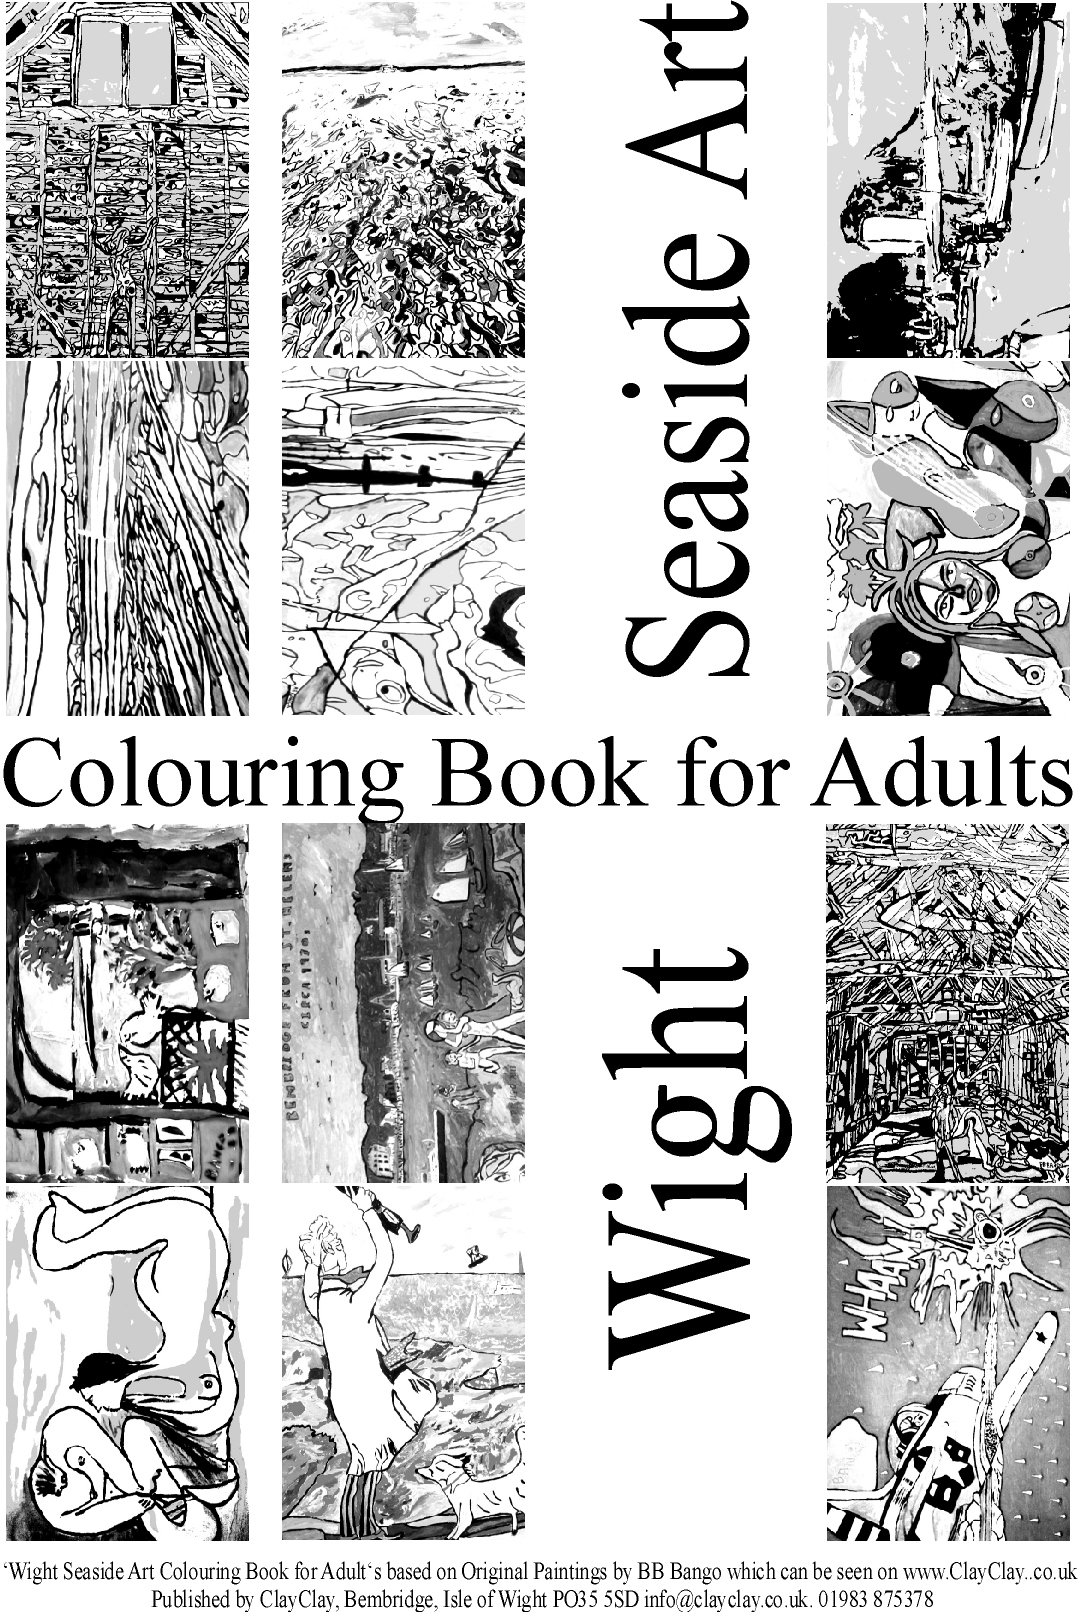 Seaside. 'Coloring (colouring) books for Adults' 12 paintings per book various themes. Use your own crayons, pastels, fibre tipped pens, ink, watercolour, acrylic or oil paints. £5 per book plus £2.50 postage and packing. E mail us your requirements